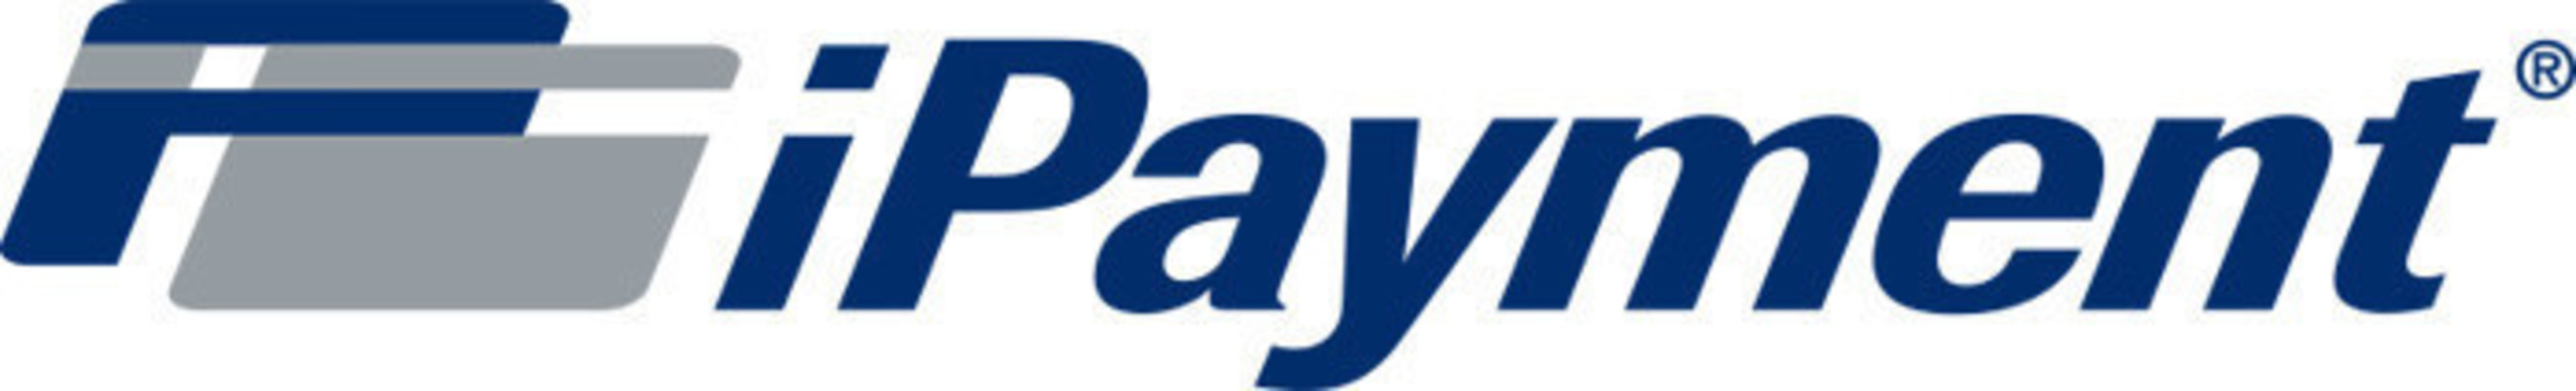 Image of iPayment logo